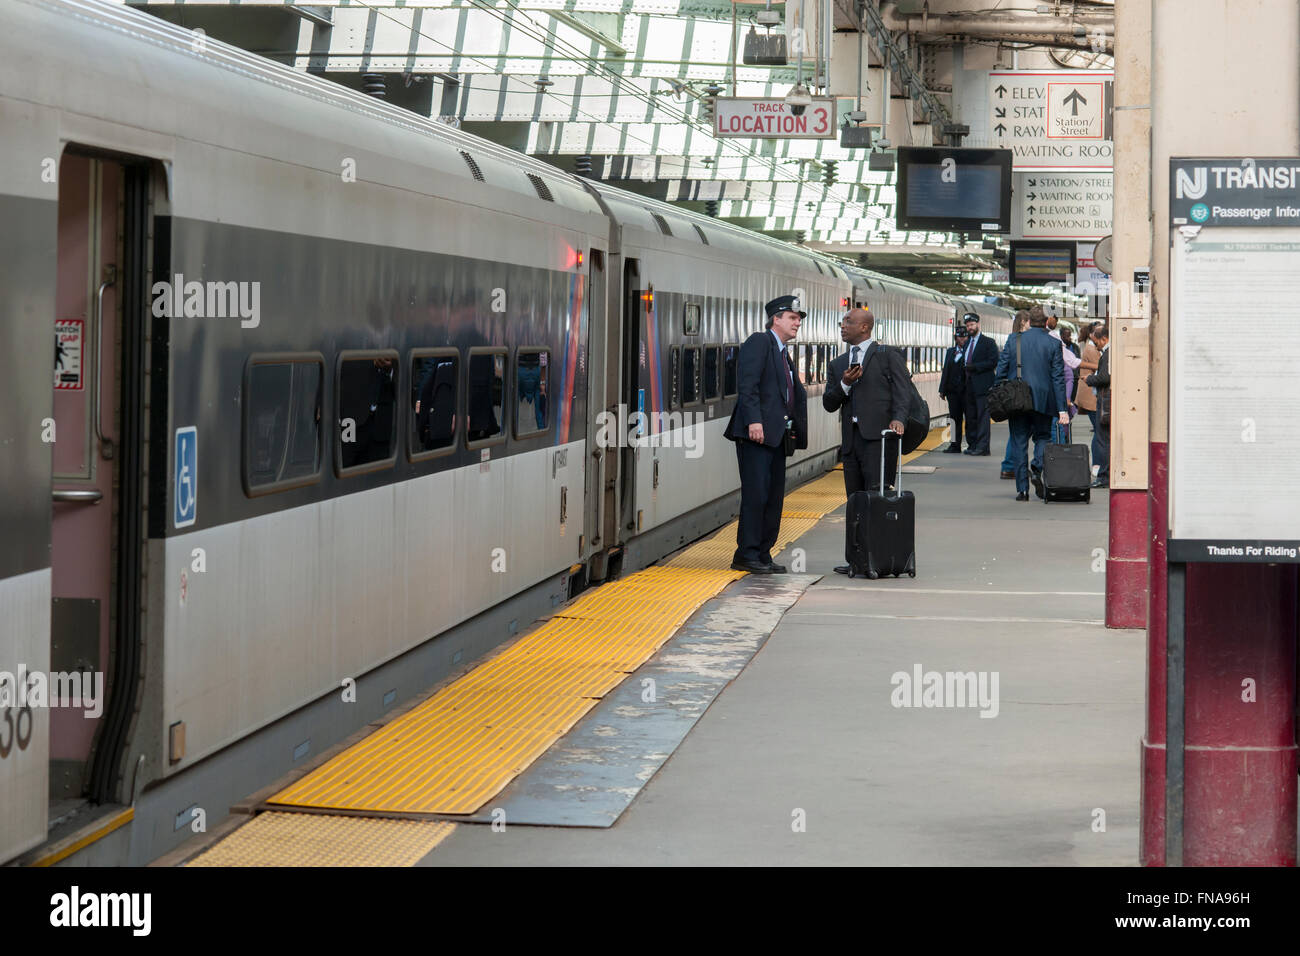 NJ Transit trains arrive for now at Newark Penn Station in Newark, NJ on  Friday, March 11, 2016. Negotiations are underway to prevent a strike by NJ  Transit workers on Sunday, March